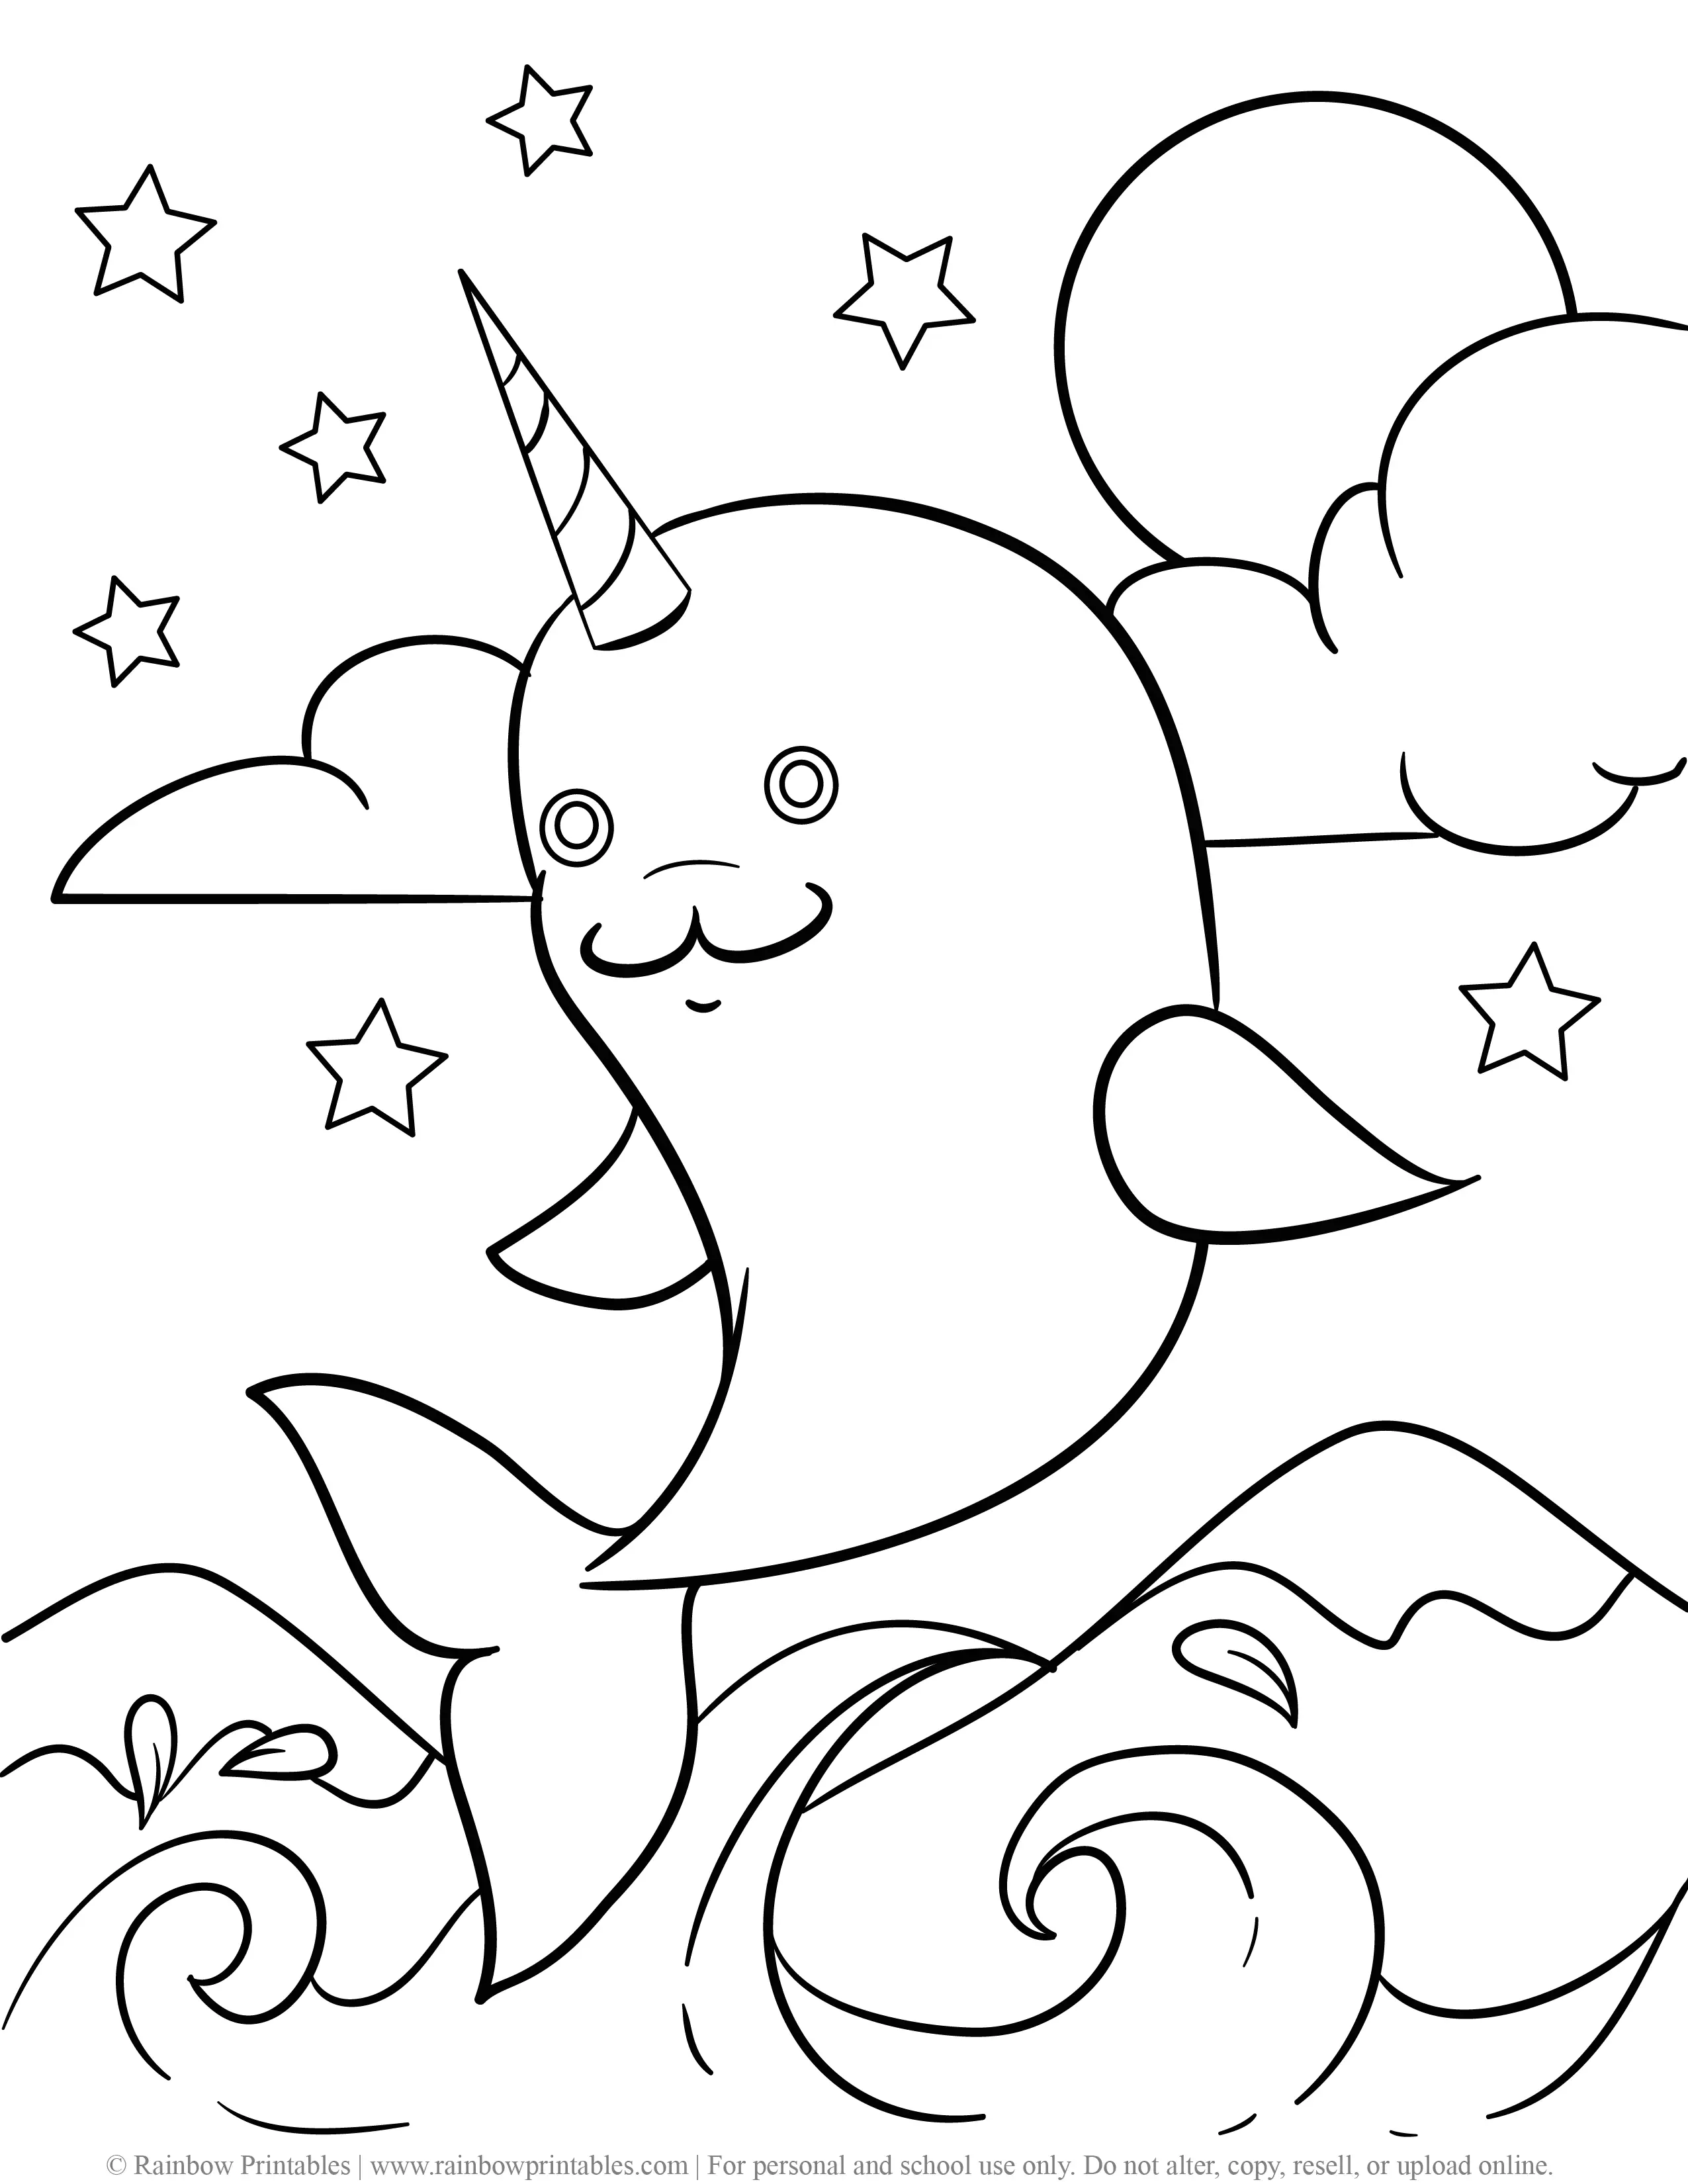 CUTE Narwhal DIVING OUT OF WATER Ocean Starry Night moon Coloring Pages for Children